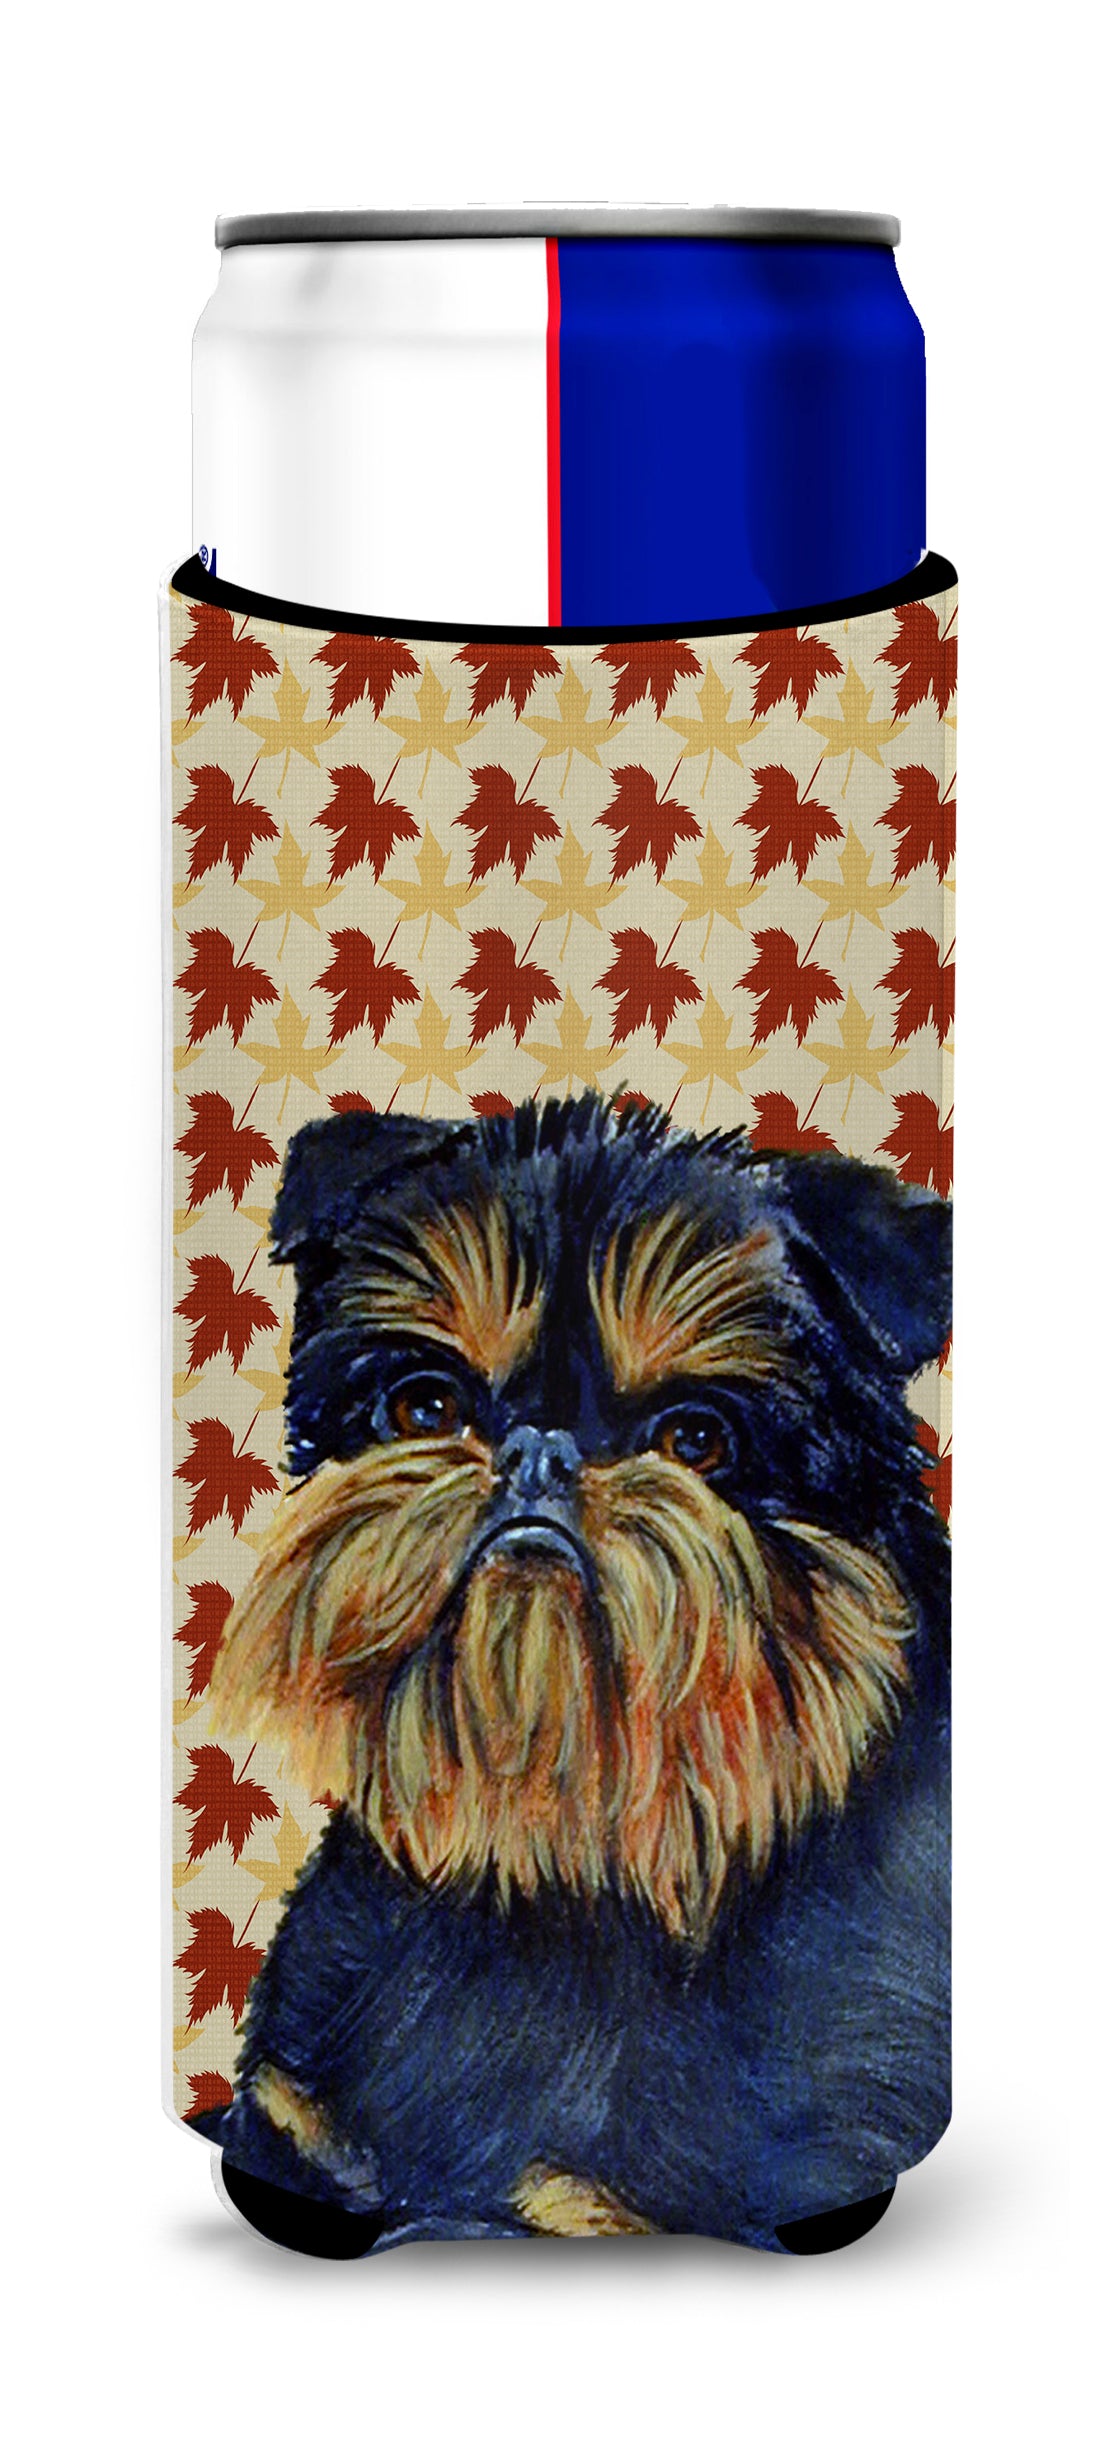 Brussels Griffon Fall Leaves Portrait Ultra Beverage Insulators for slim cans LH9118MUK.